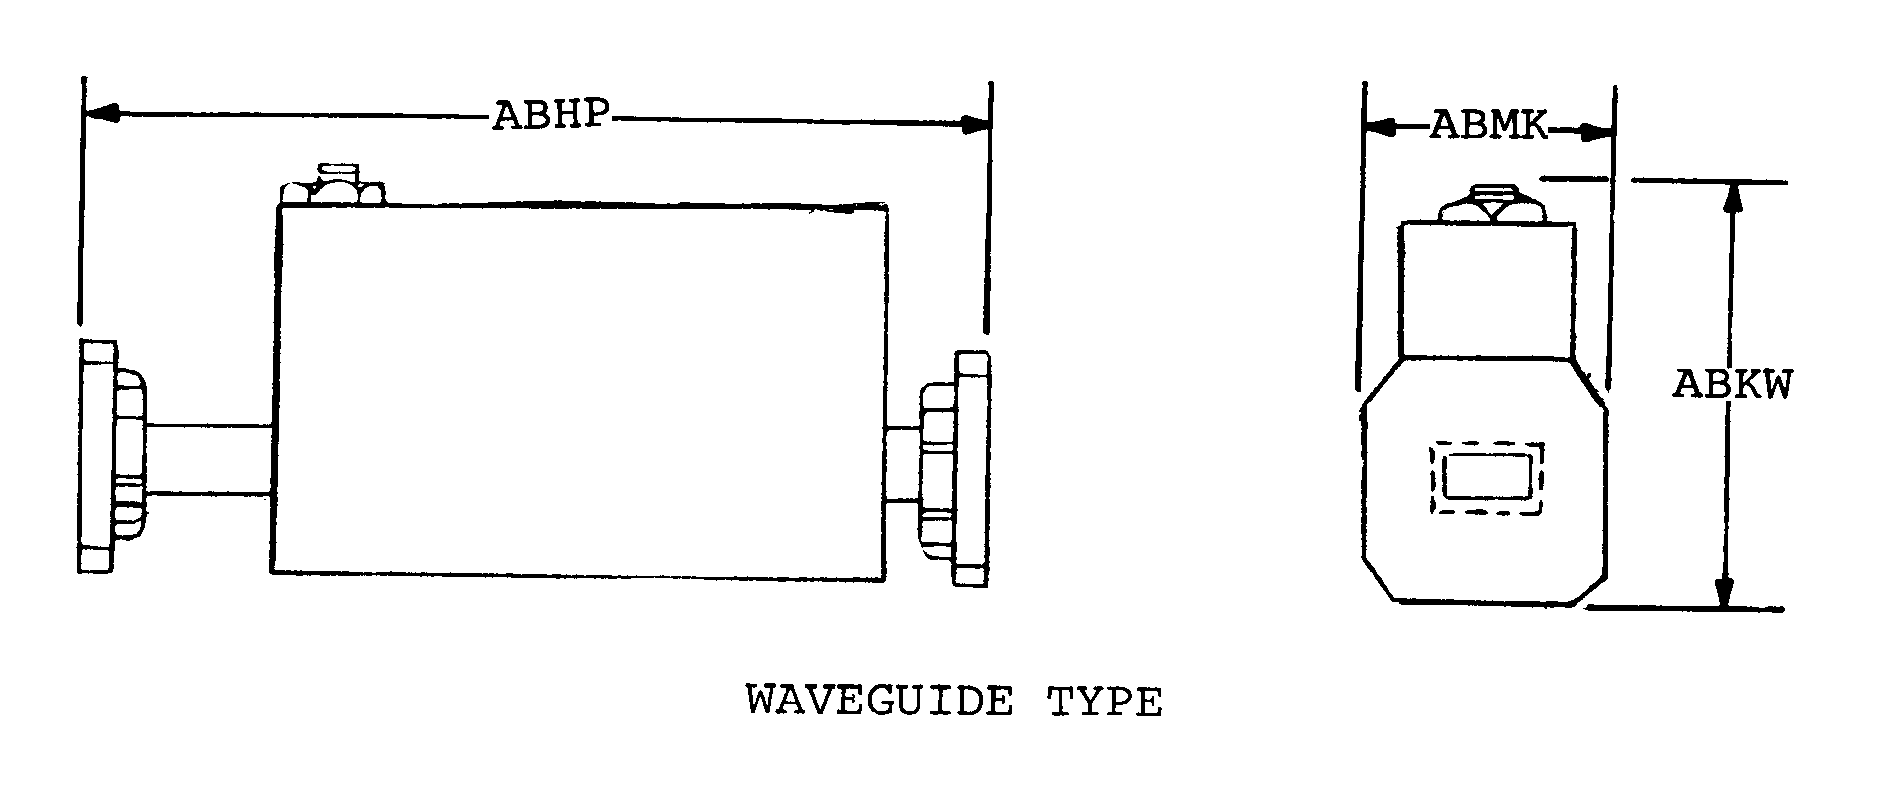 WAVEGUIDE TYPE style nsn 5985-00-056-4744